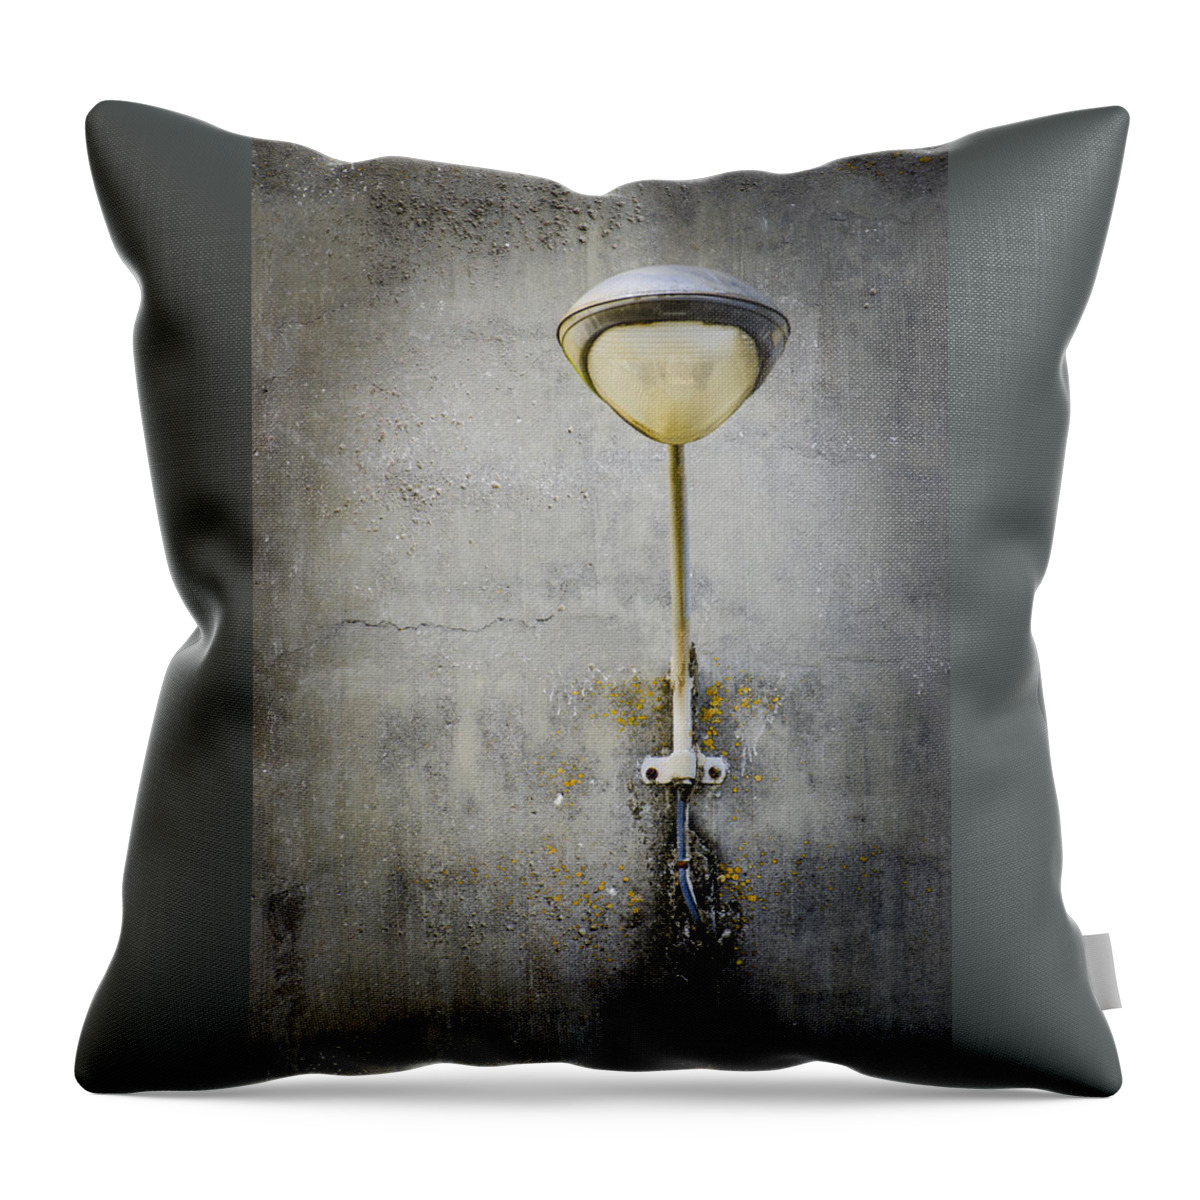 Light Throw Pillow featuring the photograph Just One Light by Carolyn Marshall